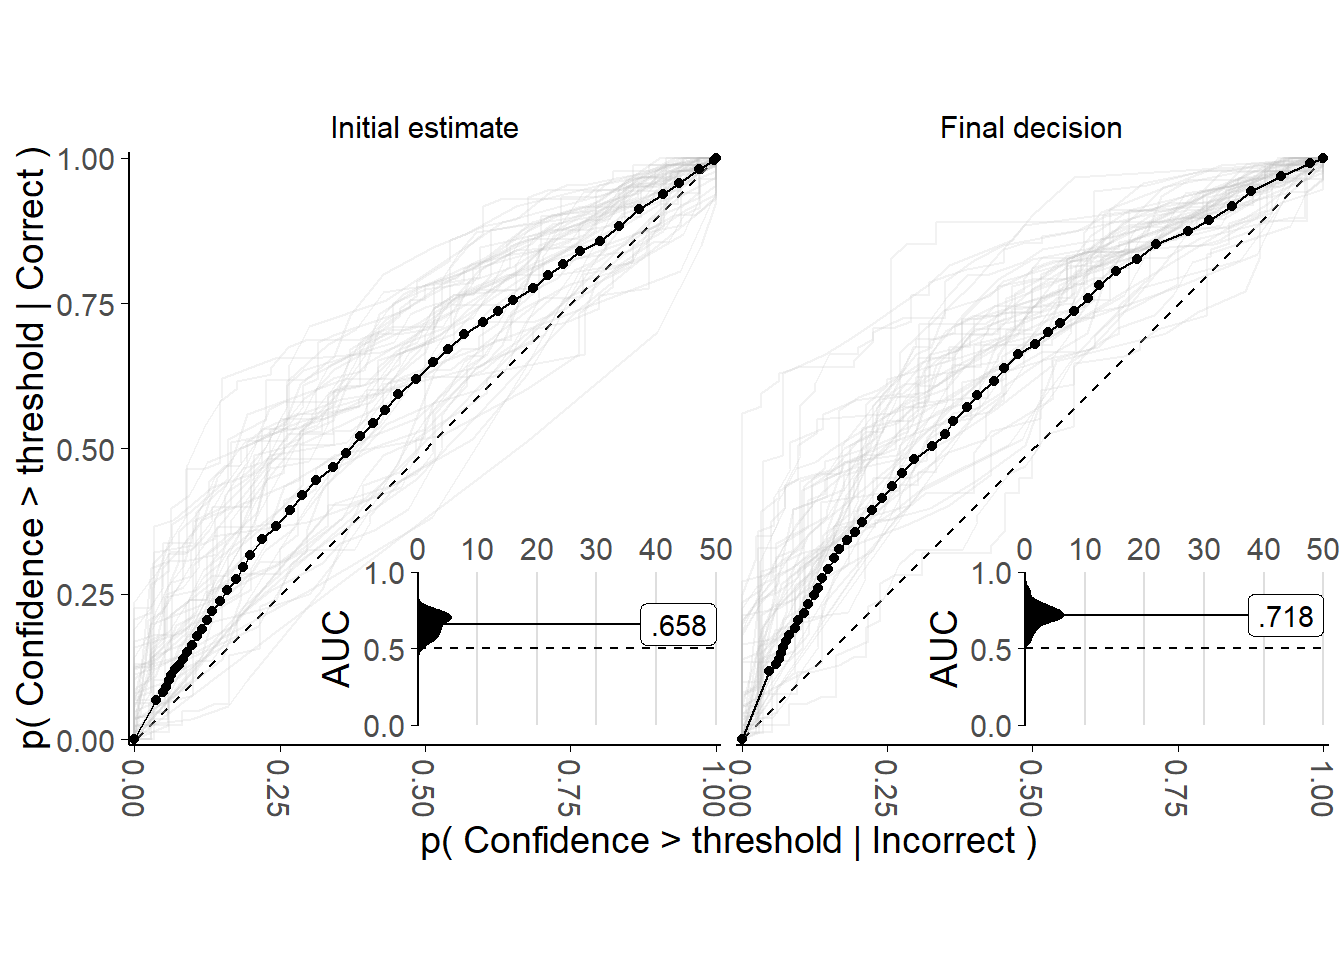 Metacognitive performance for the Dots task with in/accurate advisors.<br/> Faint lines show Receiver Operator Characteristic (ROC) curves for individual participants, while points and solid lines show mean data for all participants. Each participant's data are split into initial estimates and final decisions. For correct and incorrect responses seperately, the probability of a confidence rating being above a response threshold is calculated, with the threshold set to every possible confidence value in turn. This produces a point for each participant in each response for each possible confidence value indicating the probability of confidence being at least that high given the answer was correct, and the equivalent probability given the answer was incorrect. These points are used to create the faint lines, and averaged to produce the solid lines. The dashed line shows chance performance where the increasing confidence threshold leads to no increase in discrimination between correct and incorrect answers. The inset plot shows the distribution of areas under the ROC, and the label gives the mean value.